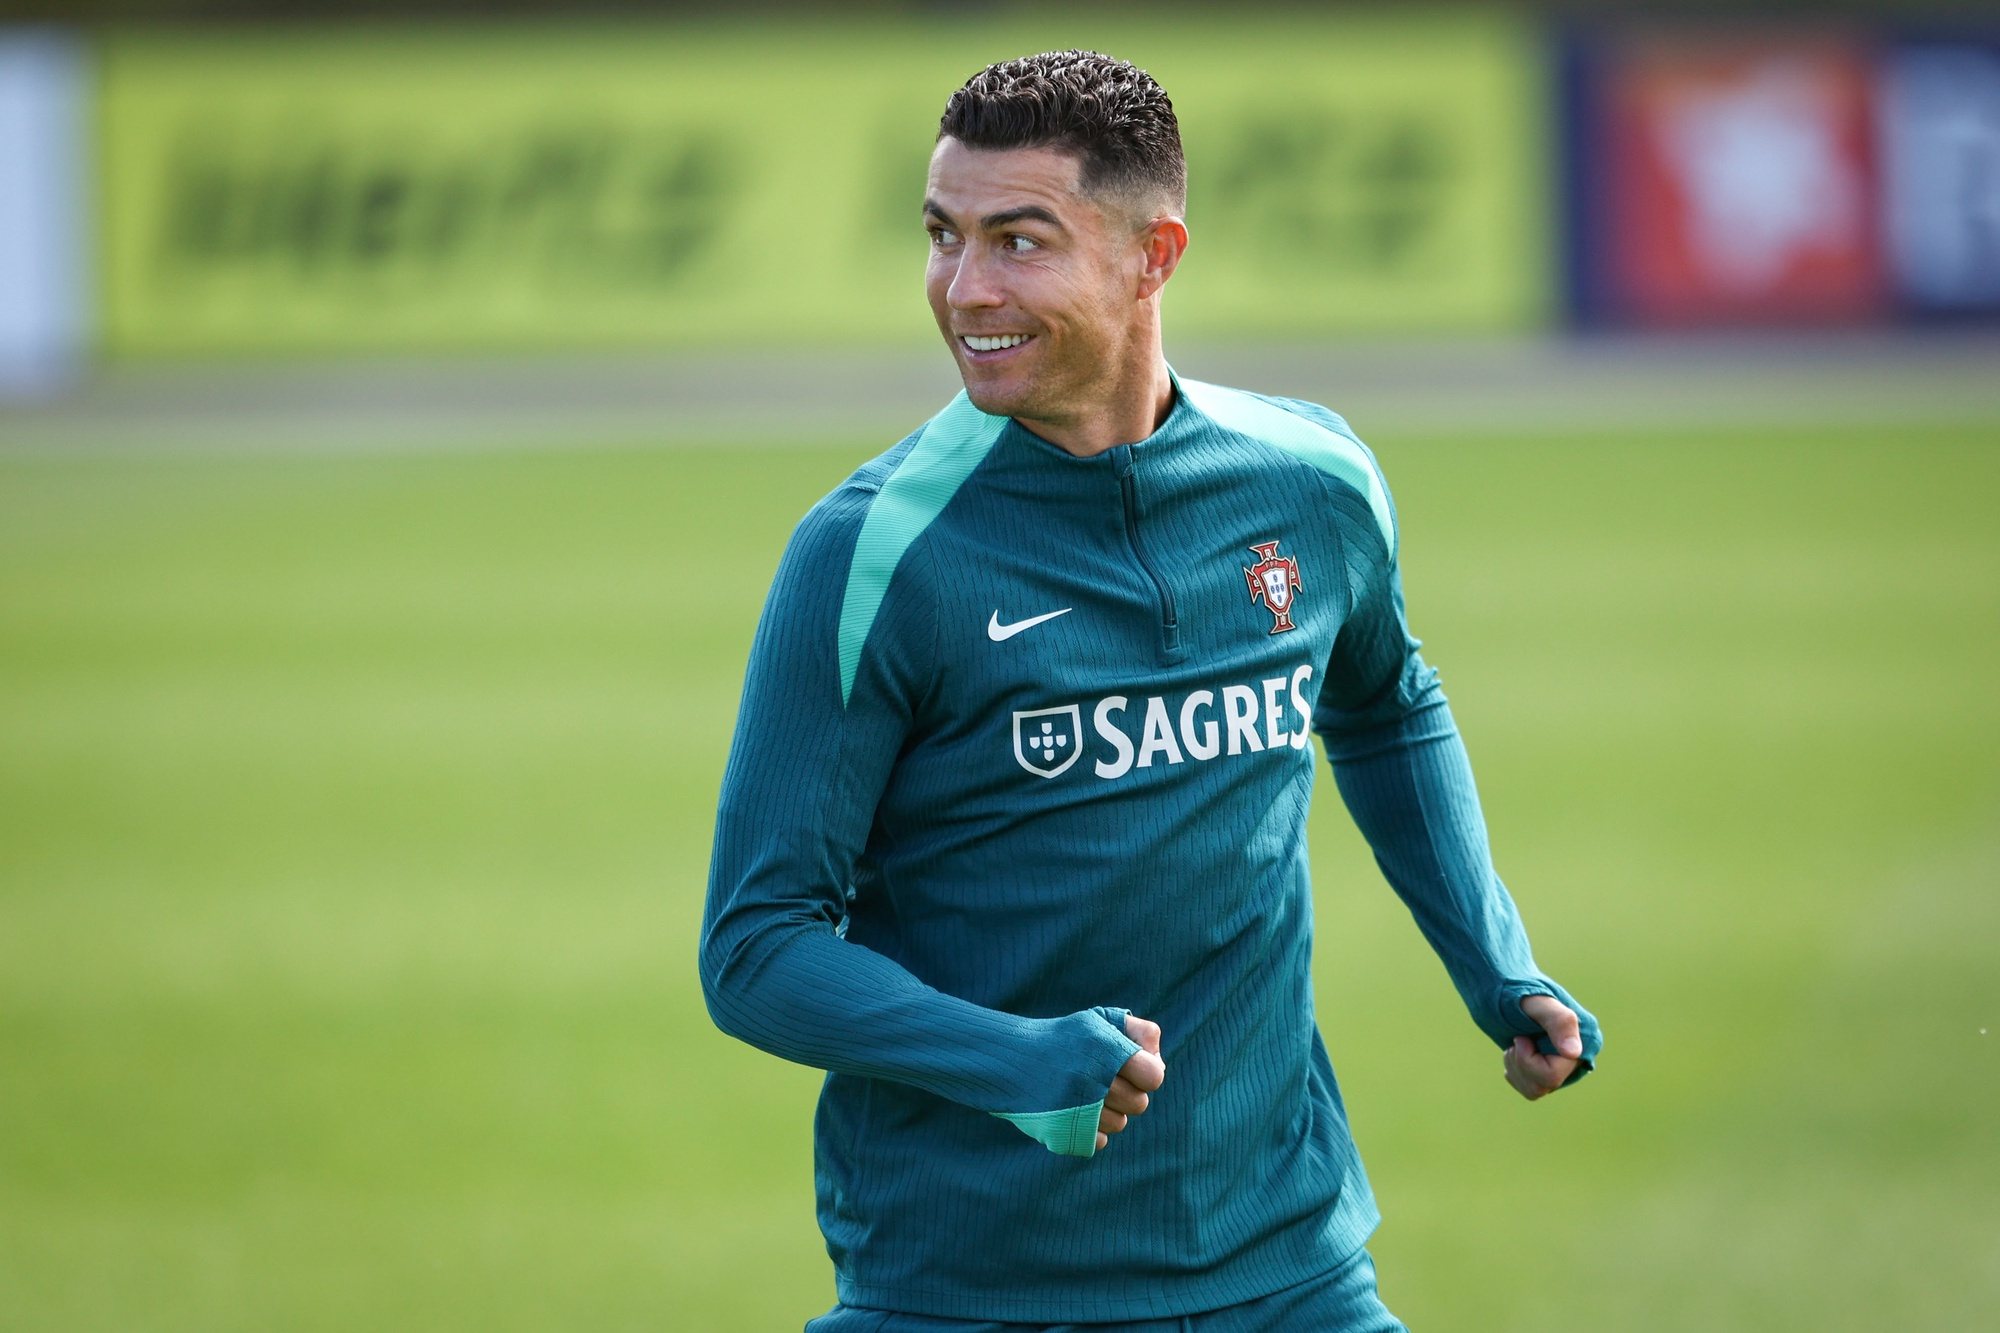 Portugal national soccer players Cristiano Ronaldo during a training session at Cidade do Futebol in Oeiras, Portugal, 25th March 2024. Portugal will play friendly match against Slovenia in preparation for the upcoming Euro 2024. ANDRE KOSTERS/LUSA